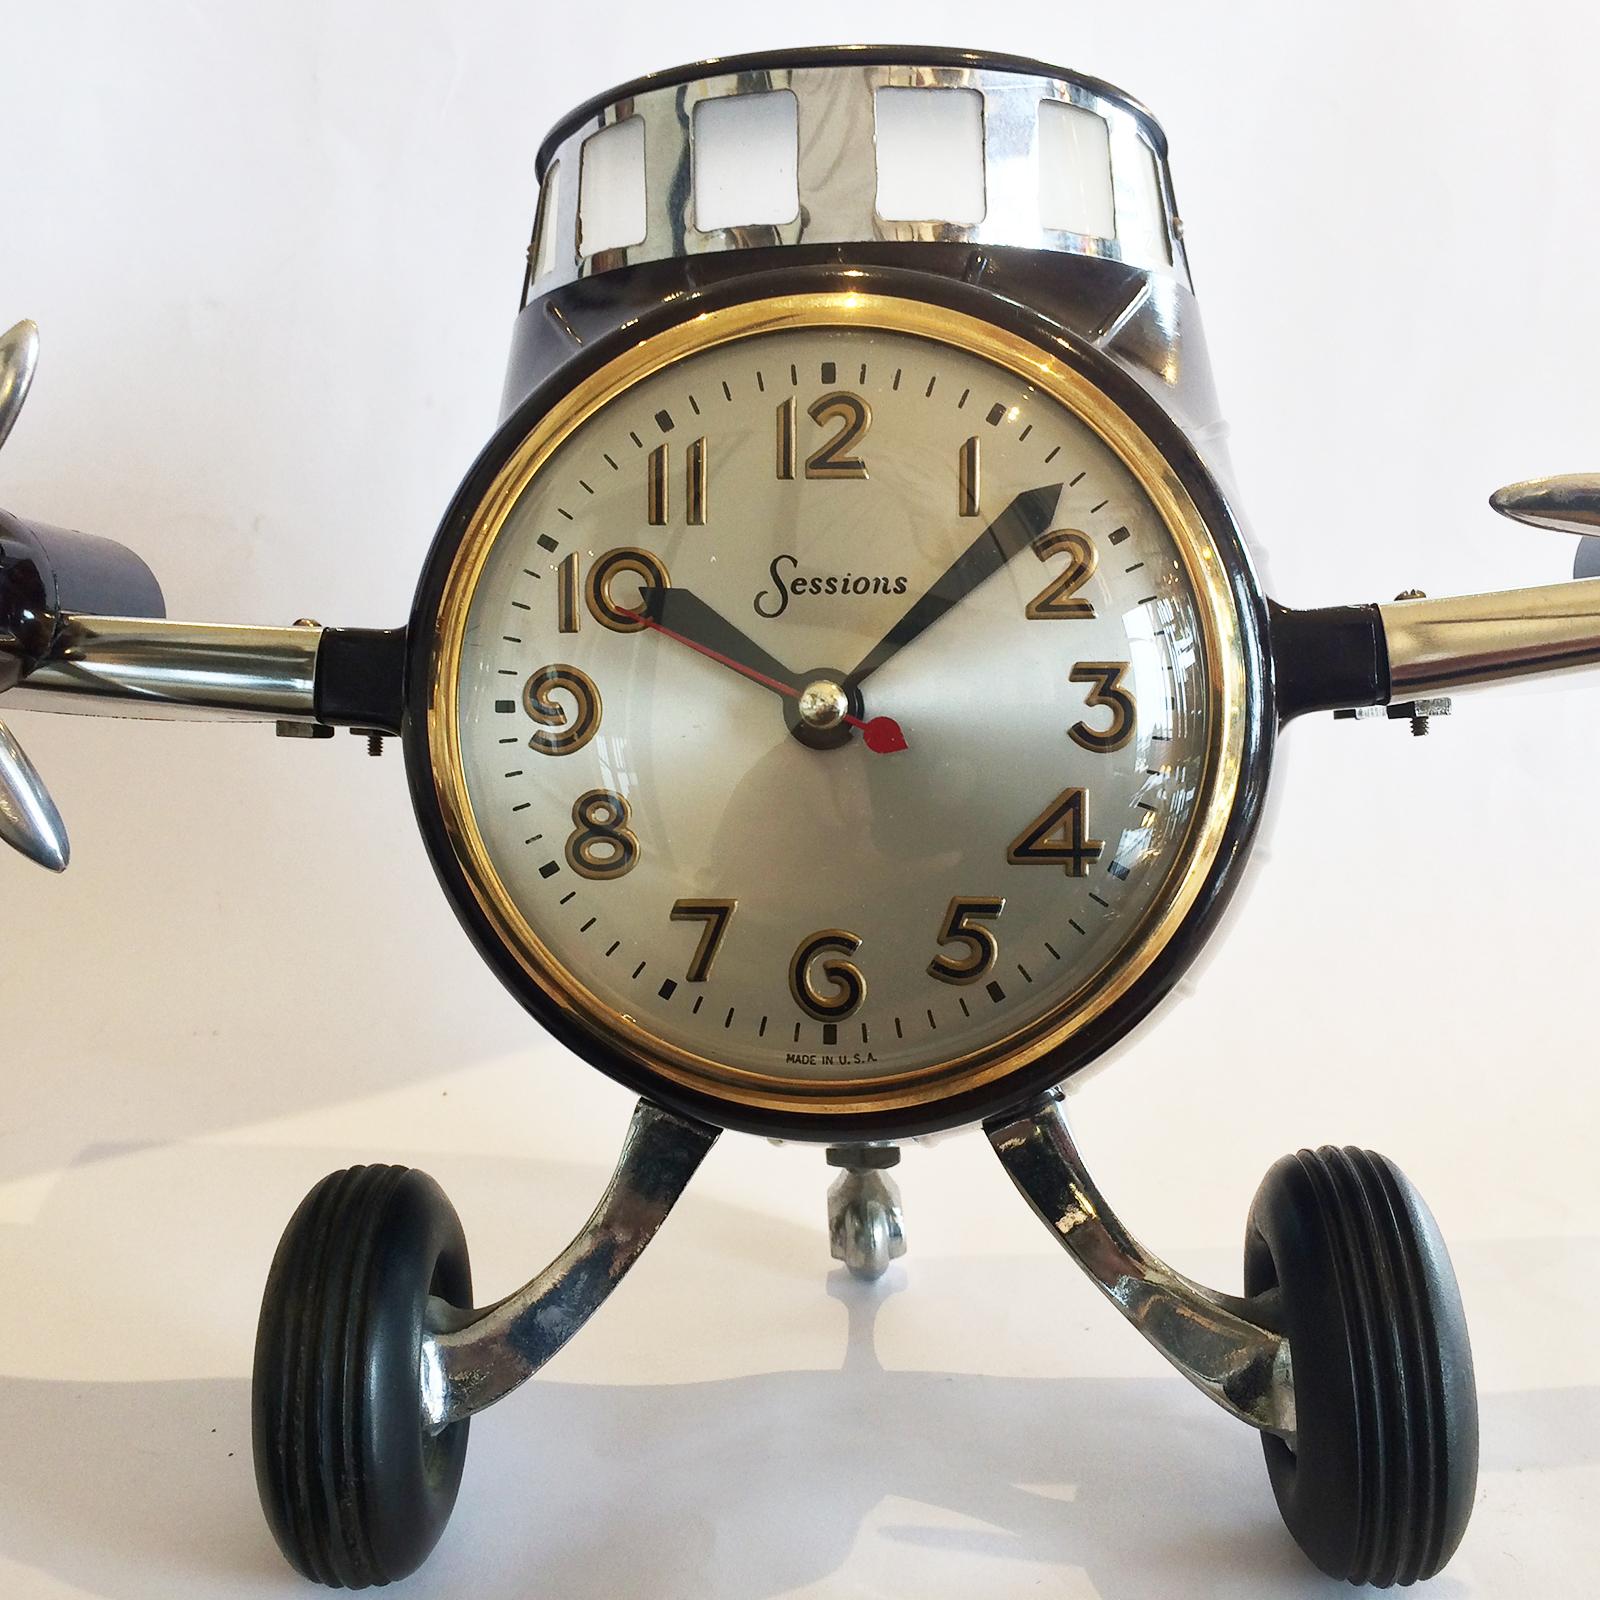 Art Deco clock by “Sessions, U.S.A.”, in Bakelite, chrome and aluminium, in form of an aeroplane with wings, front cabin and wheels only (no fuselage or rear body). A truly great piece of fun for the aeroplane or clock enthusiasts. Cast aluminium